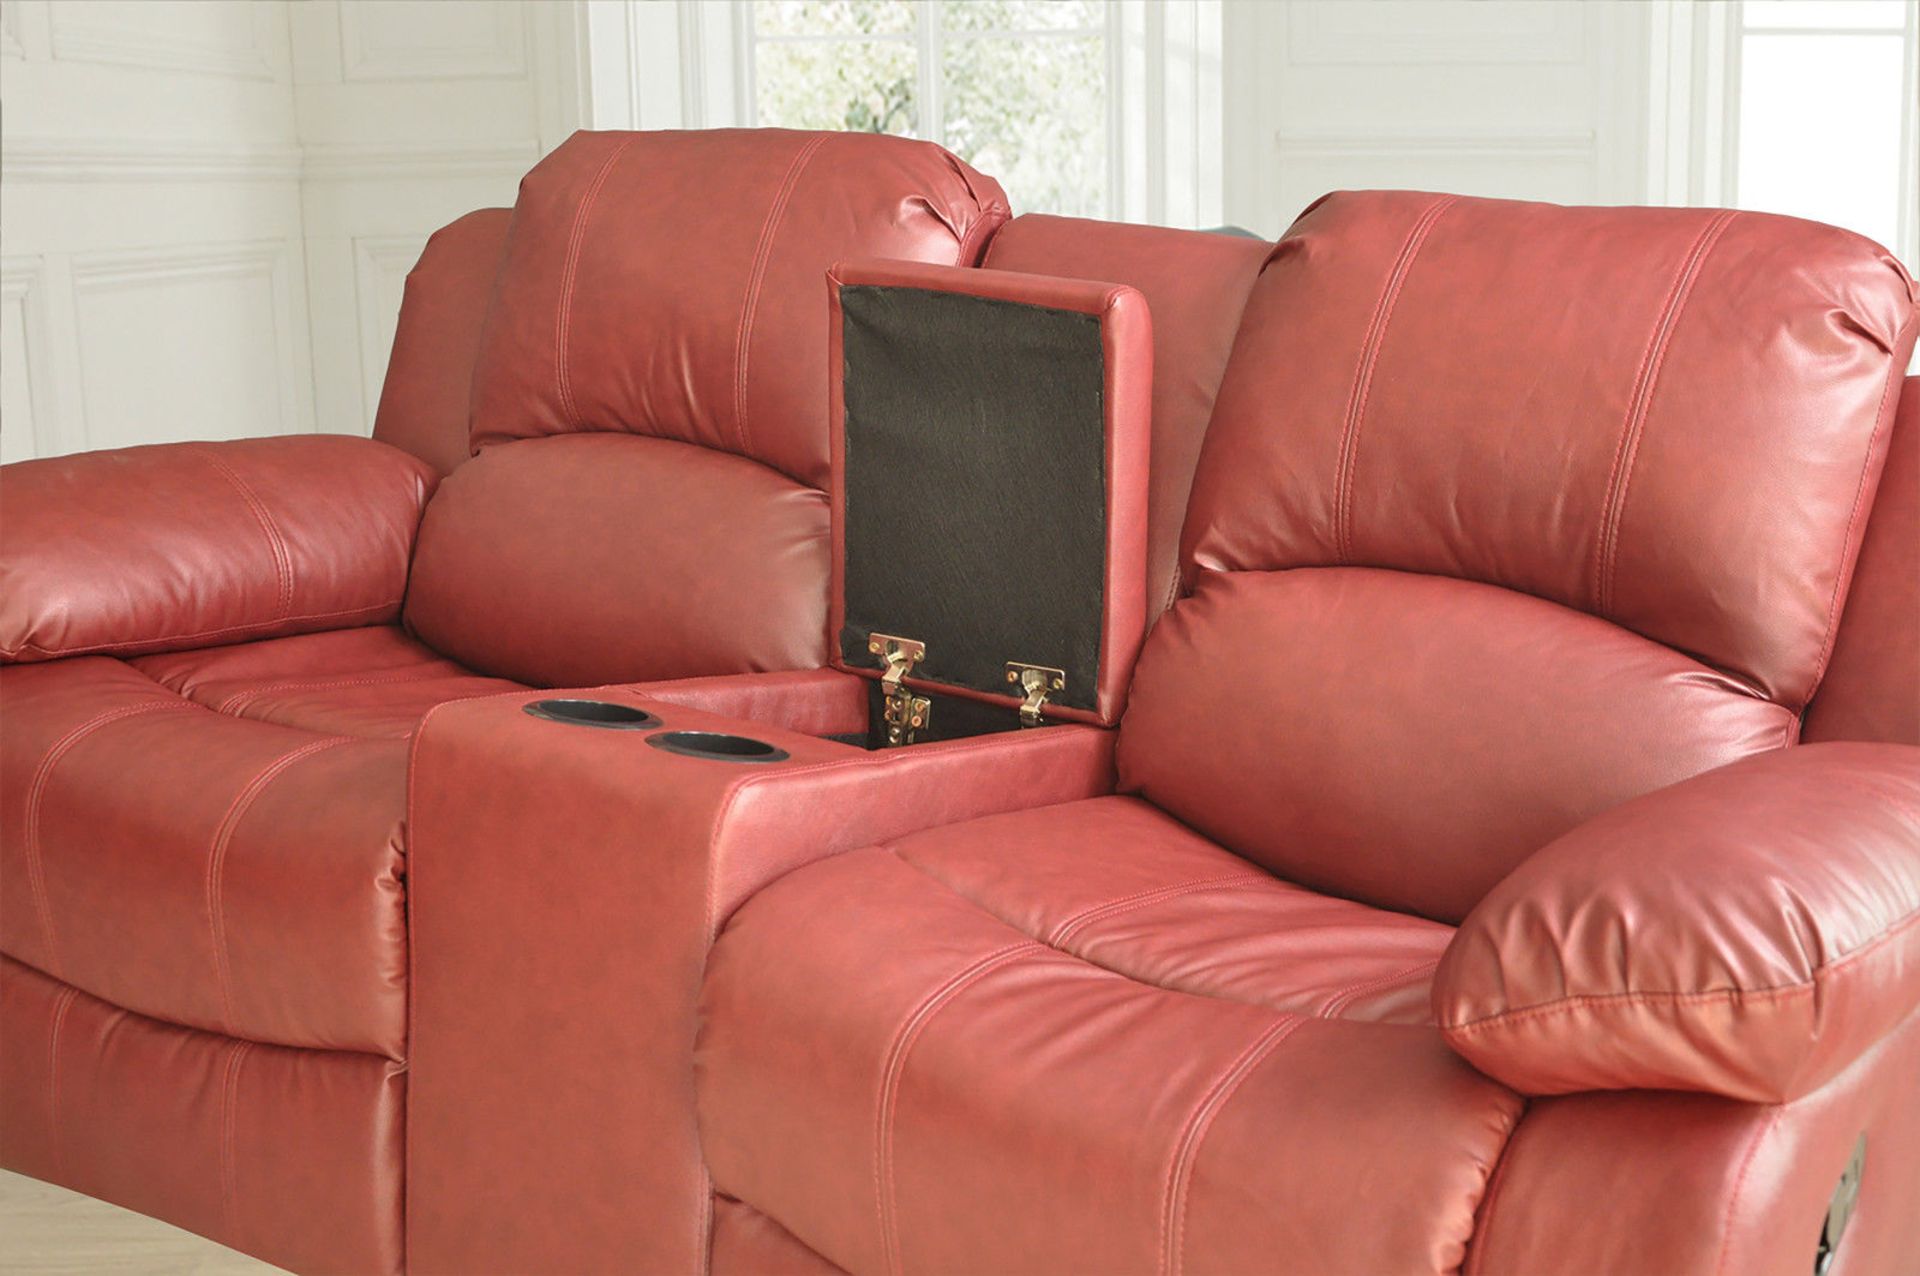 Supreme Valance burgandy leather 3 seater reclining sofa with console - Image 3 of 3